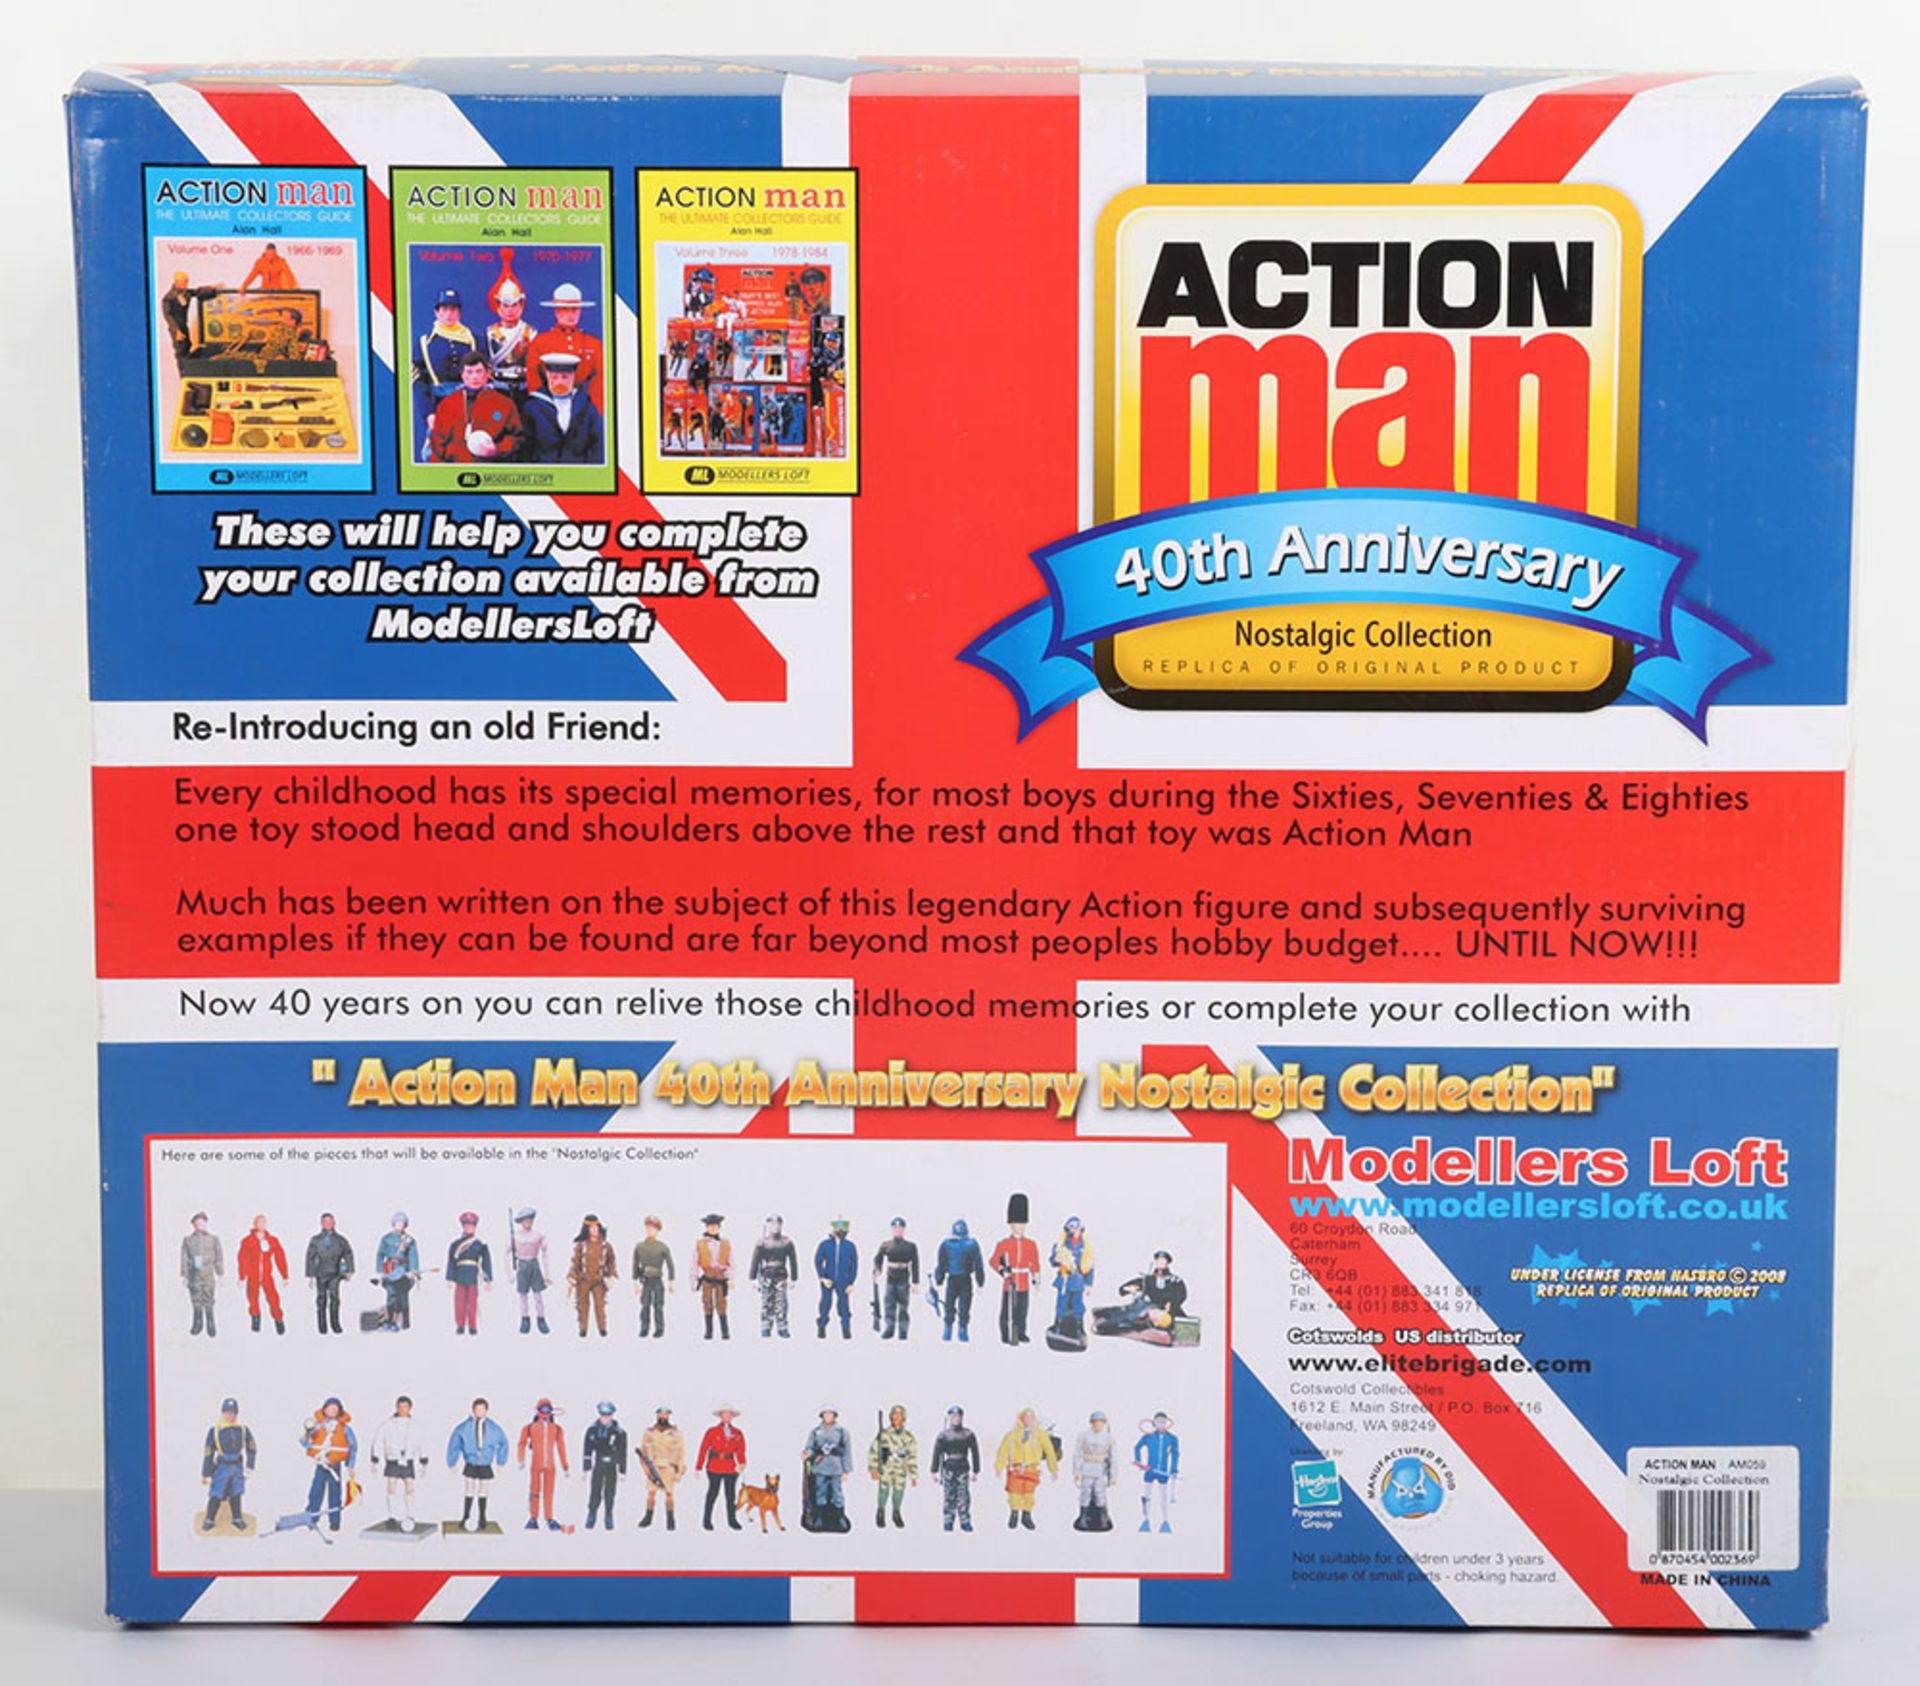 Action Man Palitoy German Stormstrooper Outfit 40th Anniversary Nostalgic Collection - Image 2 of 2